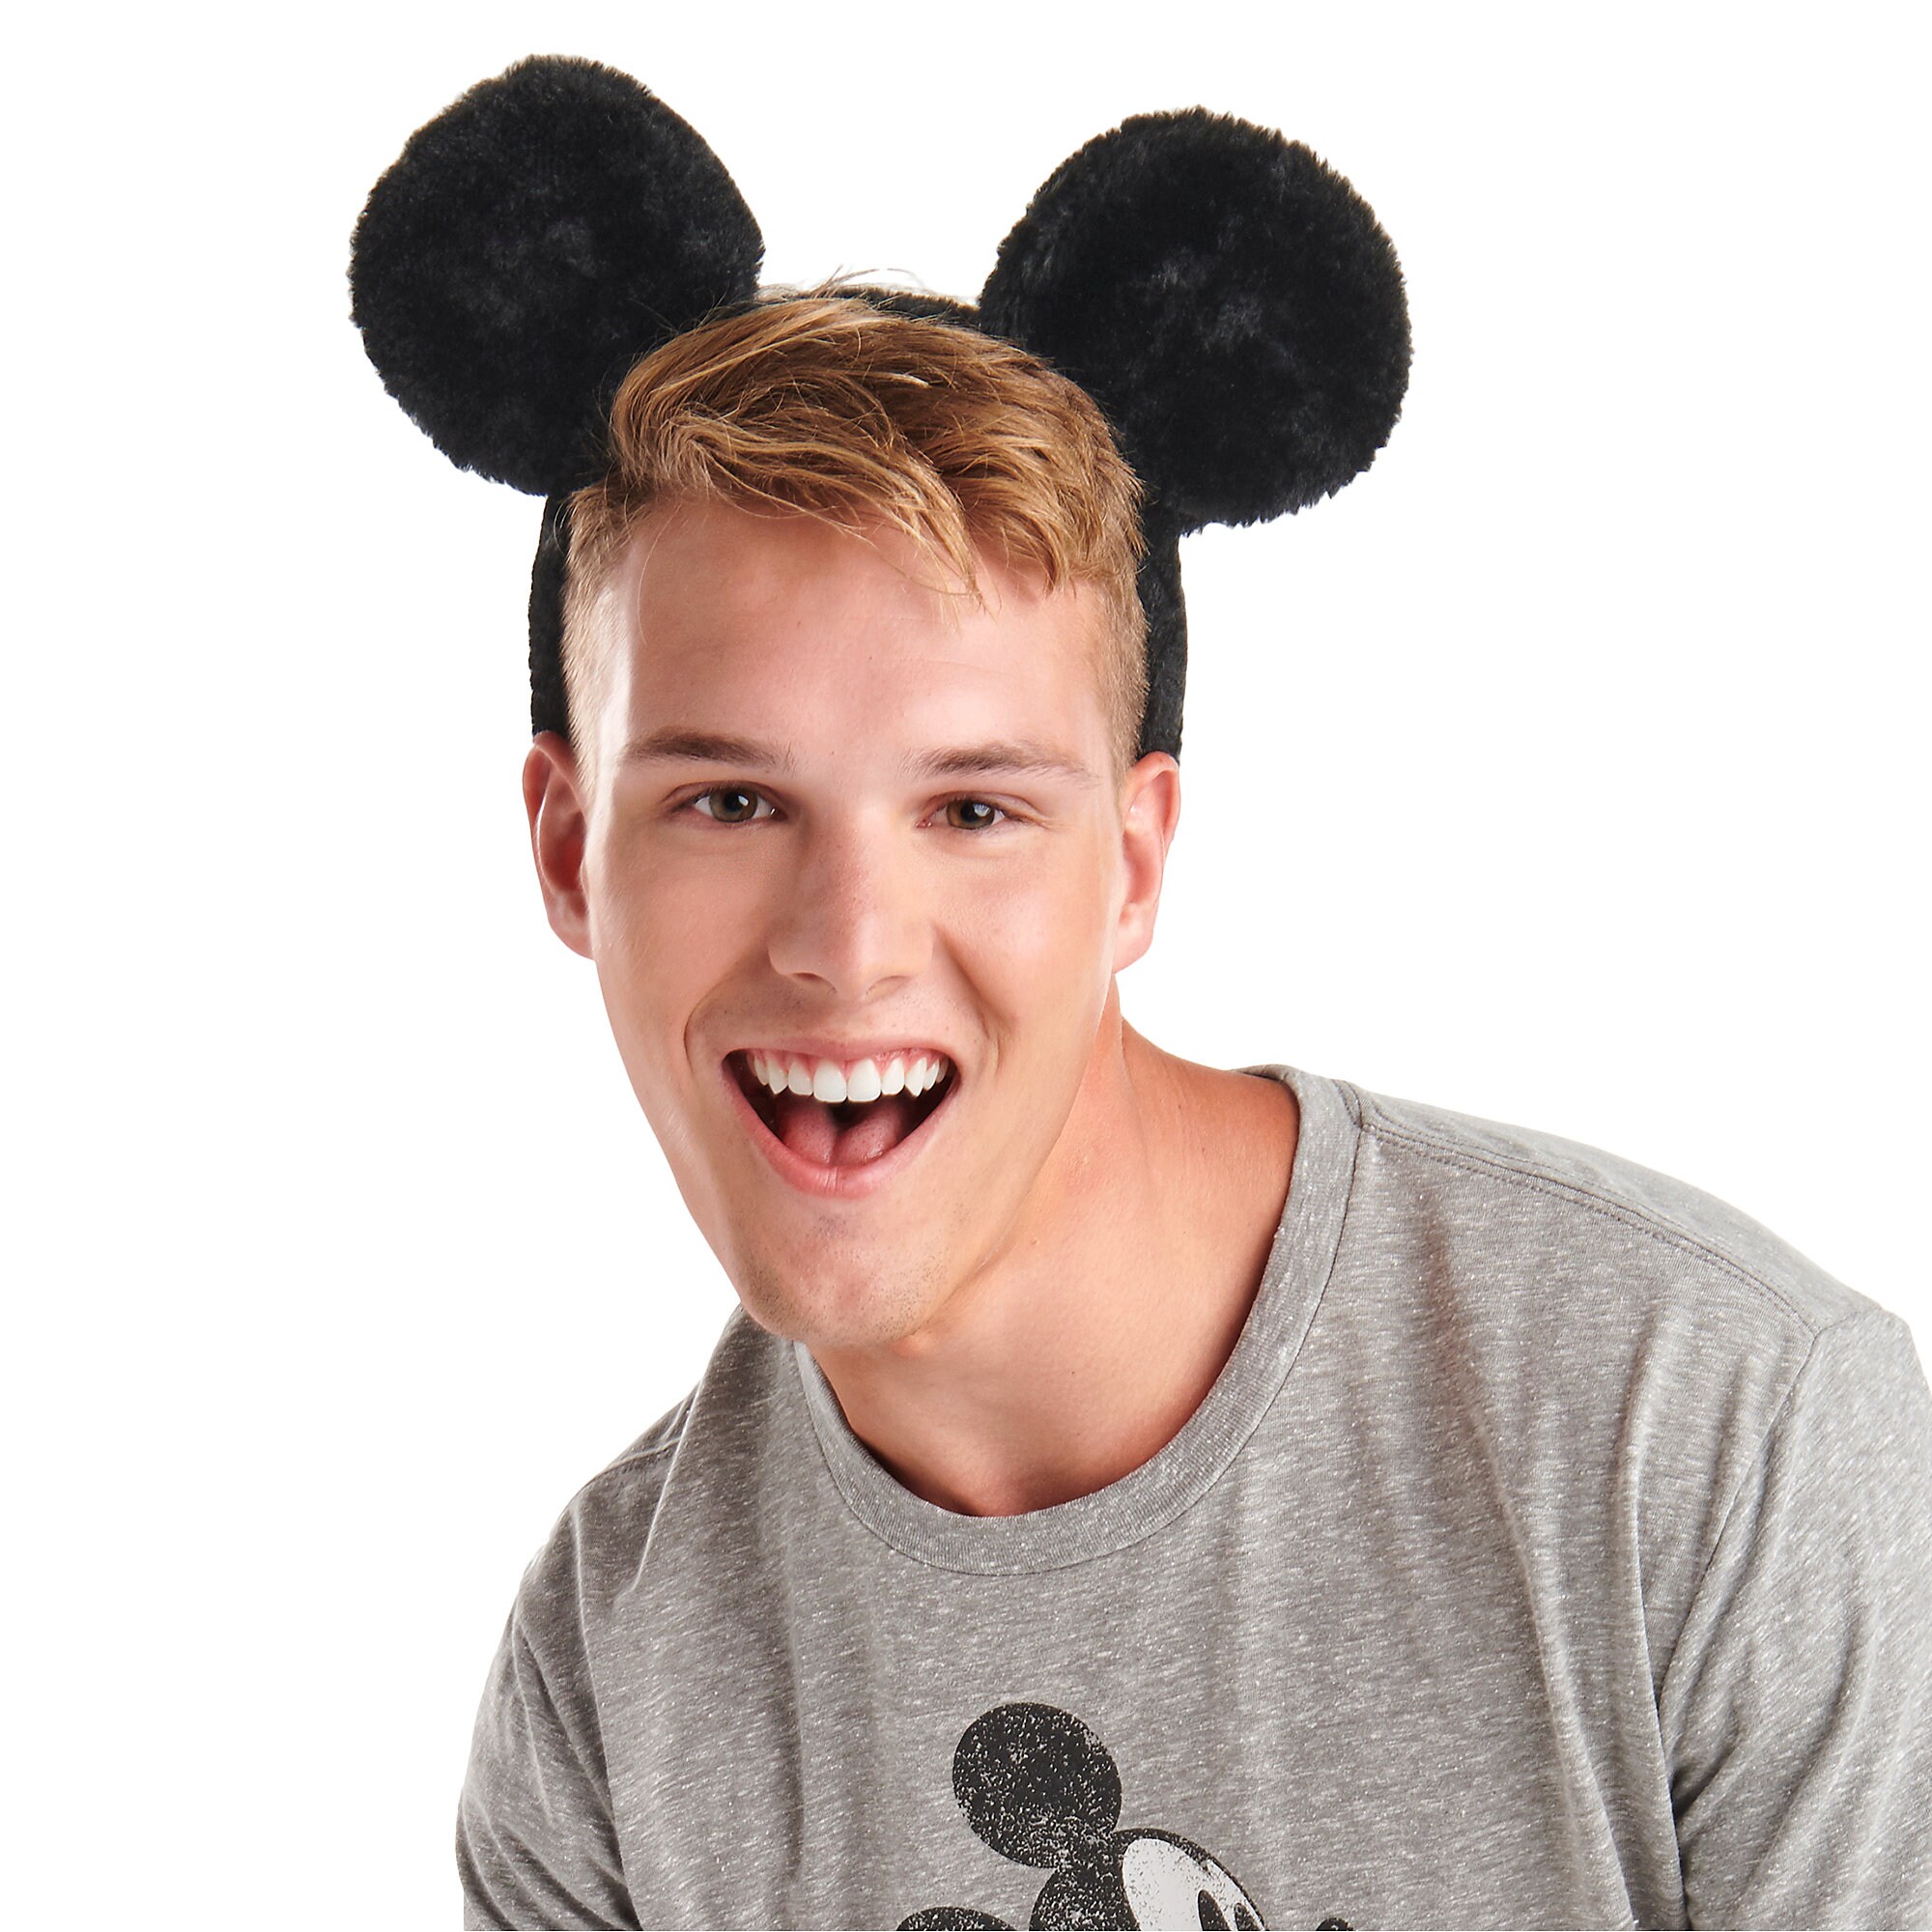 Mickey Mouse Ear Headband for Adults